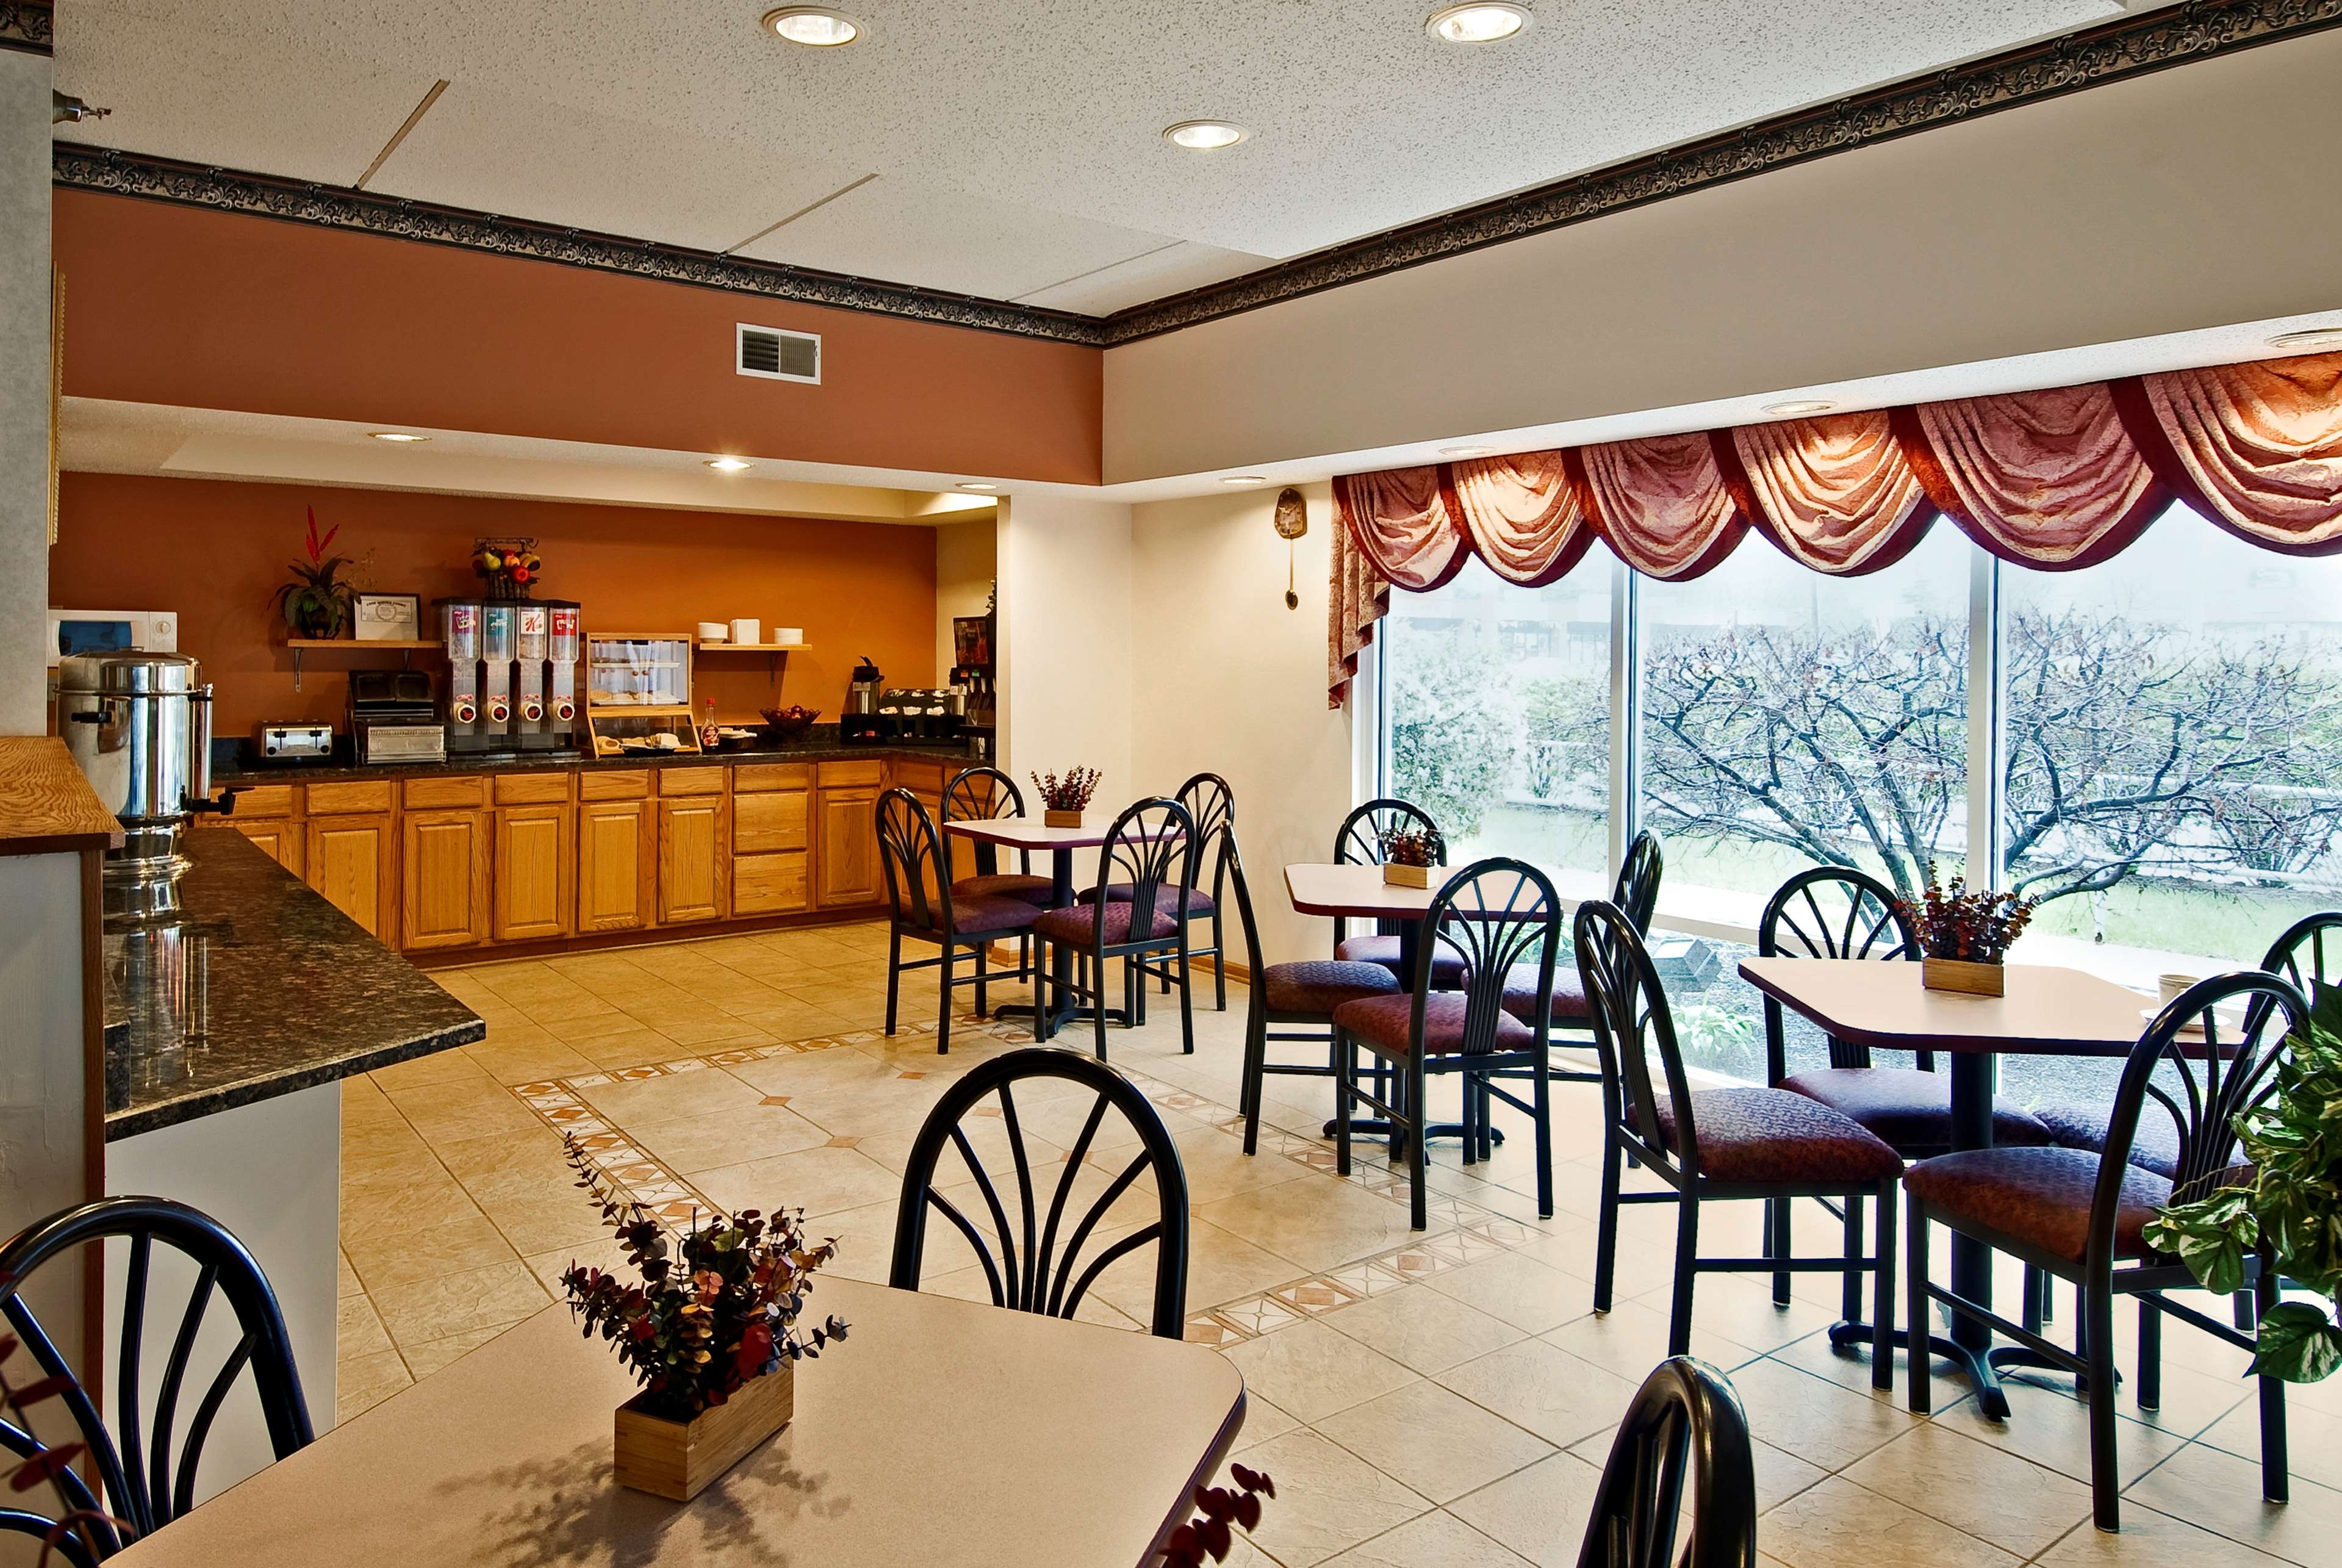 Discount [70% Off] Country Inn Suites By Radisson Gurnee Il United States - Hotel Near Me | 3 ...